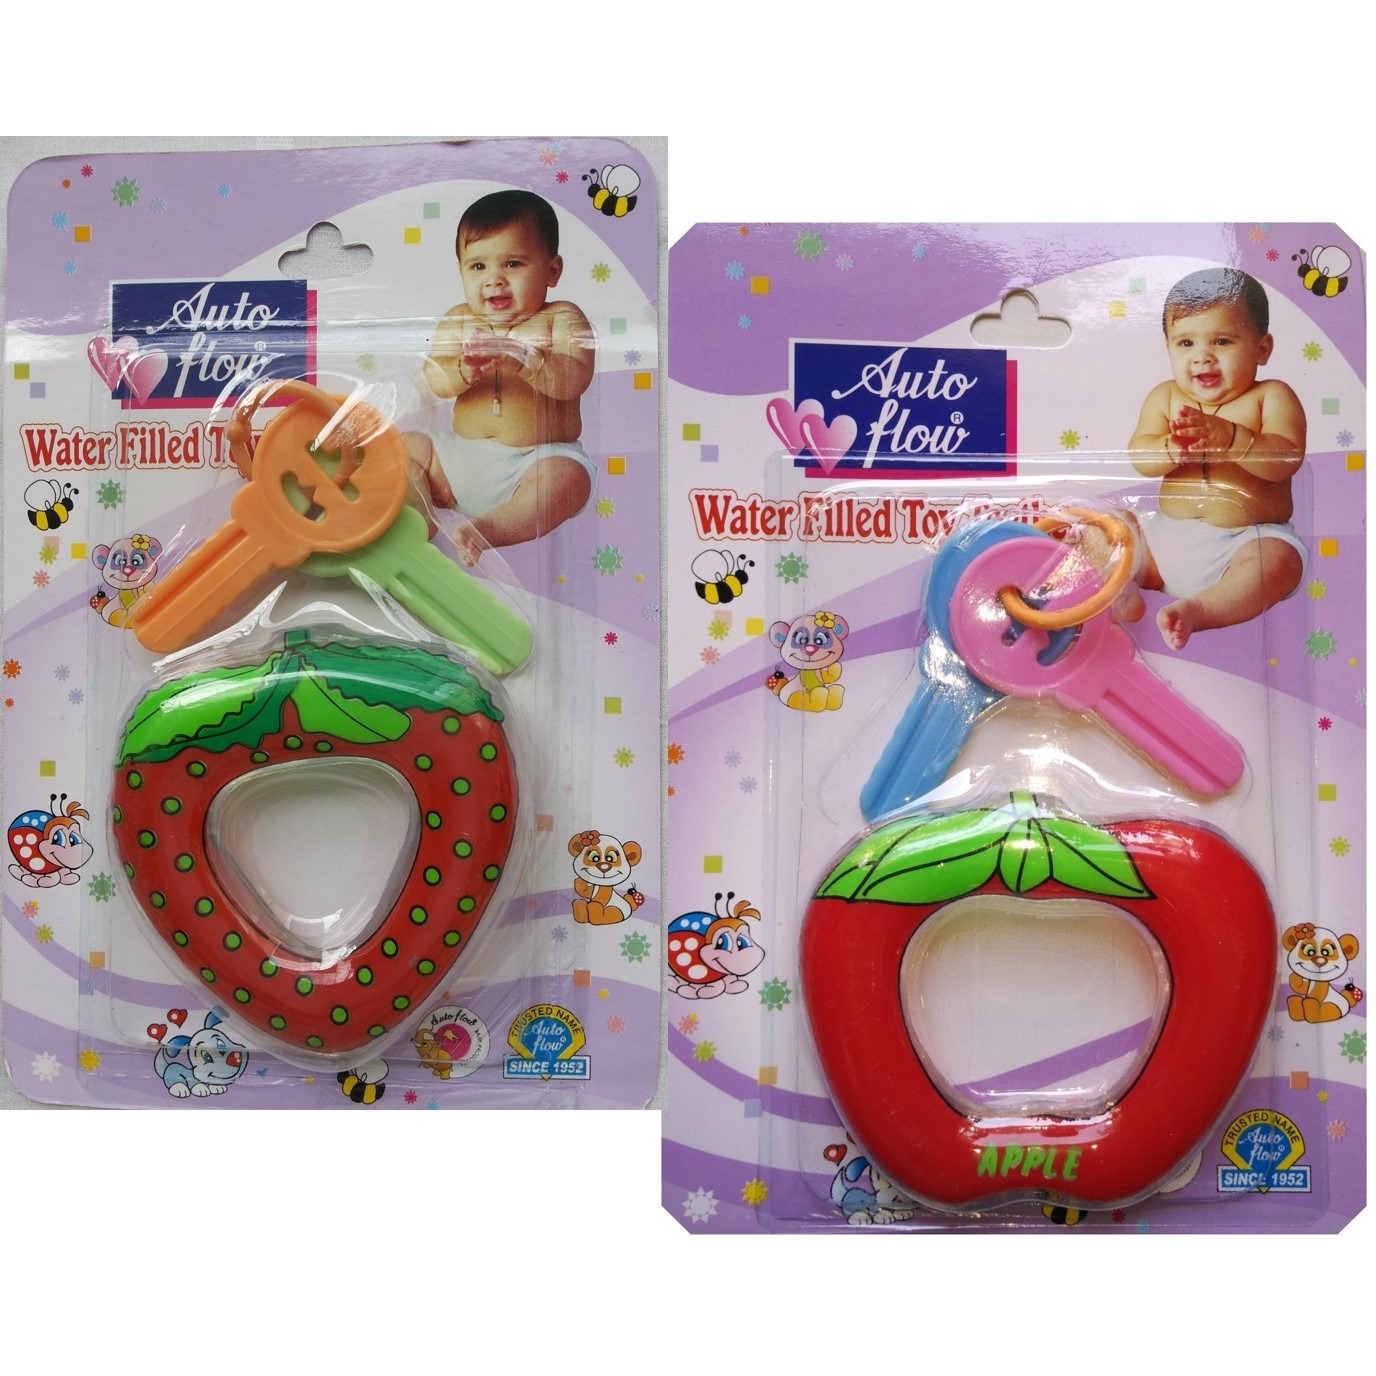 Love Baby Auto Flow Water Filled Toy Teether - BT29 Combo